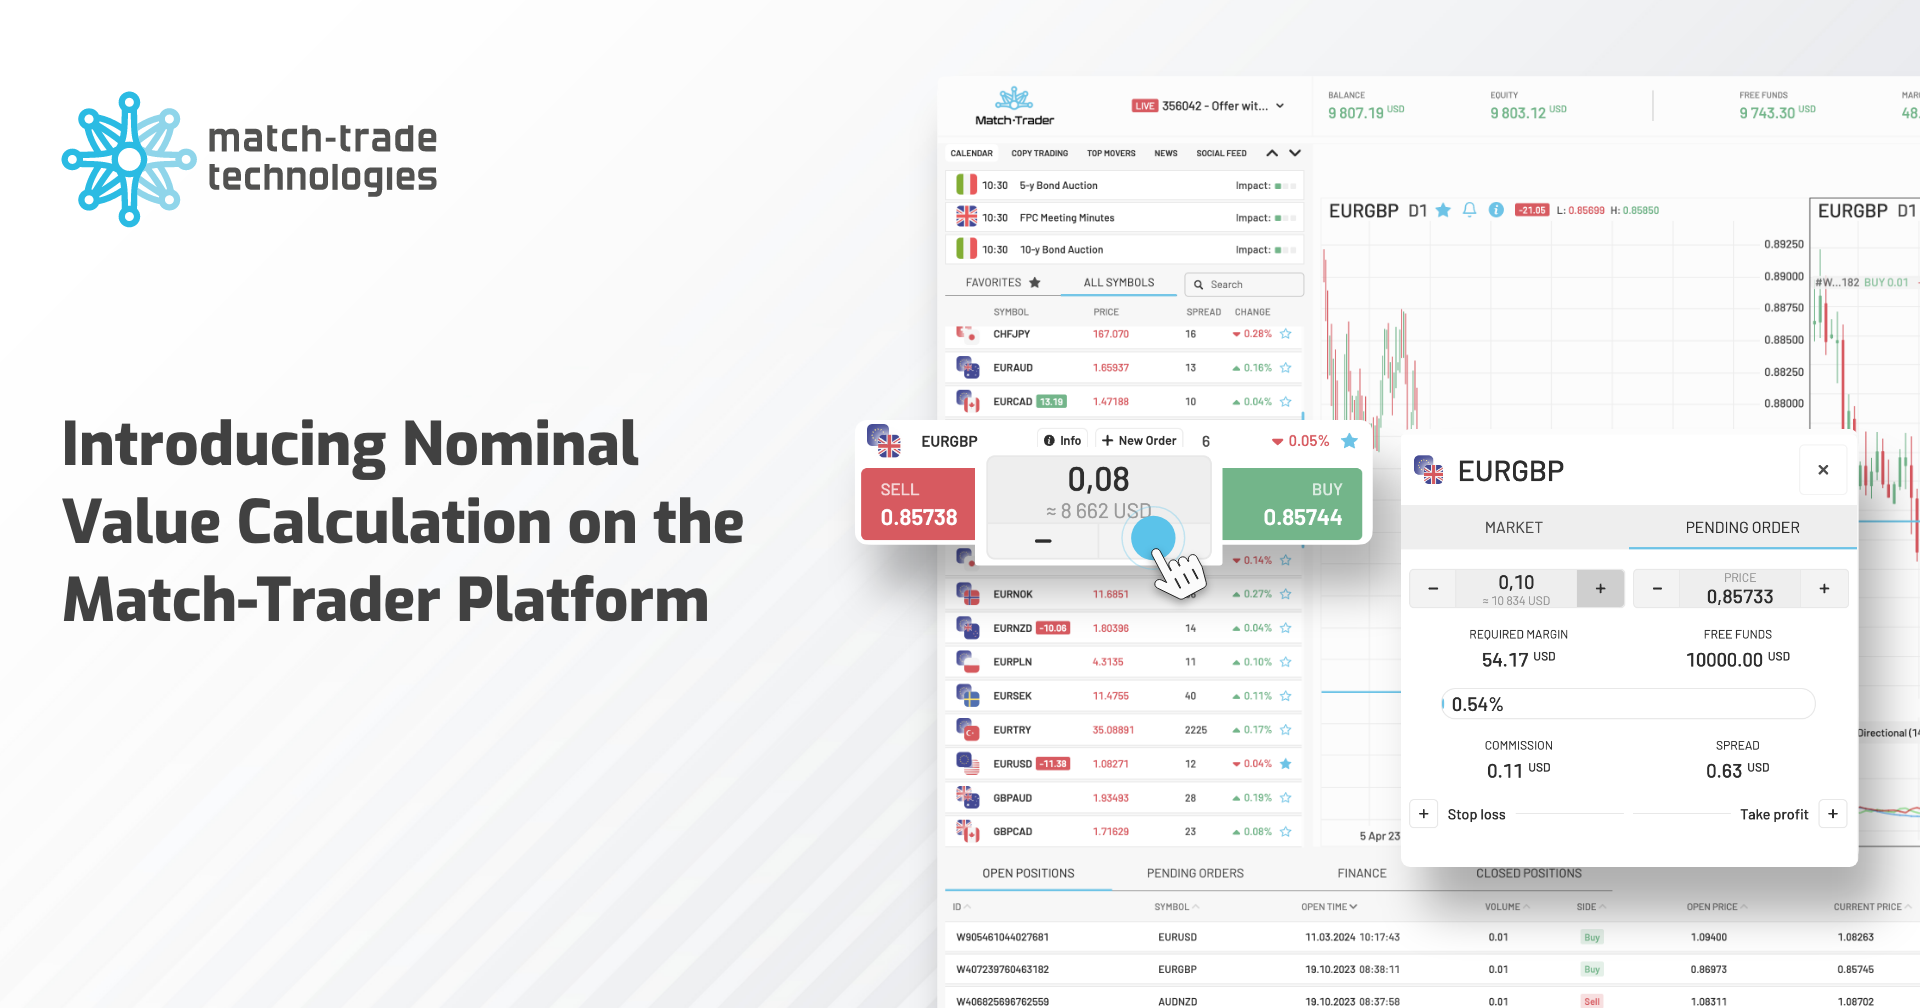 Match-Trade March release: Introducing Nominal Value Calculation on the Match-Trader Platform